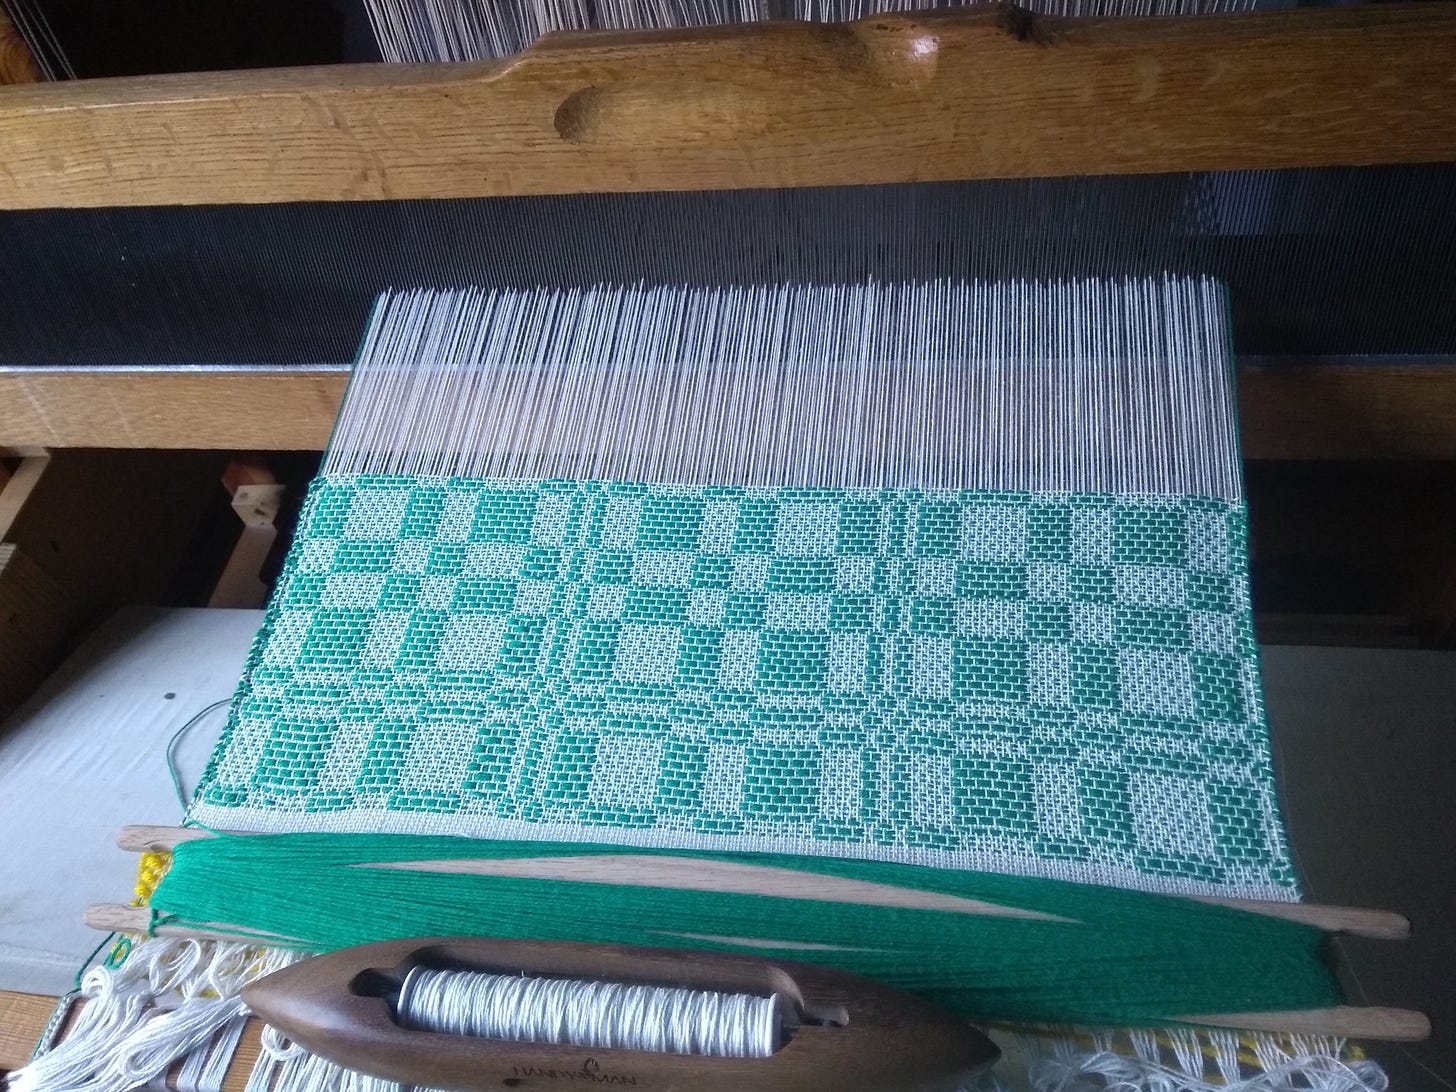 The very start of hand-woven fabric on a floor loom, with a geometric checkered pattern in green and white. A stick shuttle and a boat shuttle are resting at the bottom.